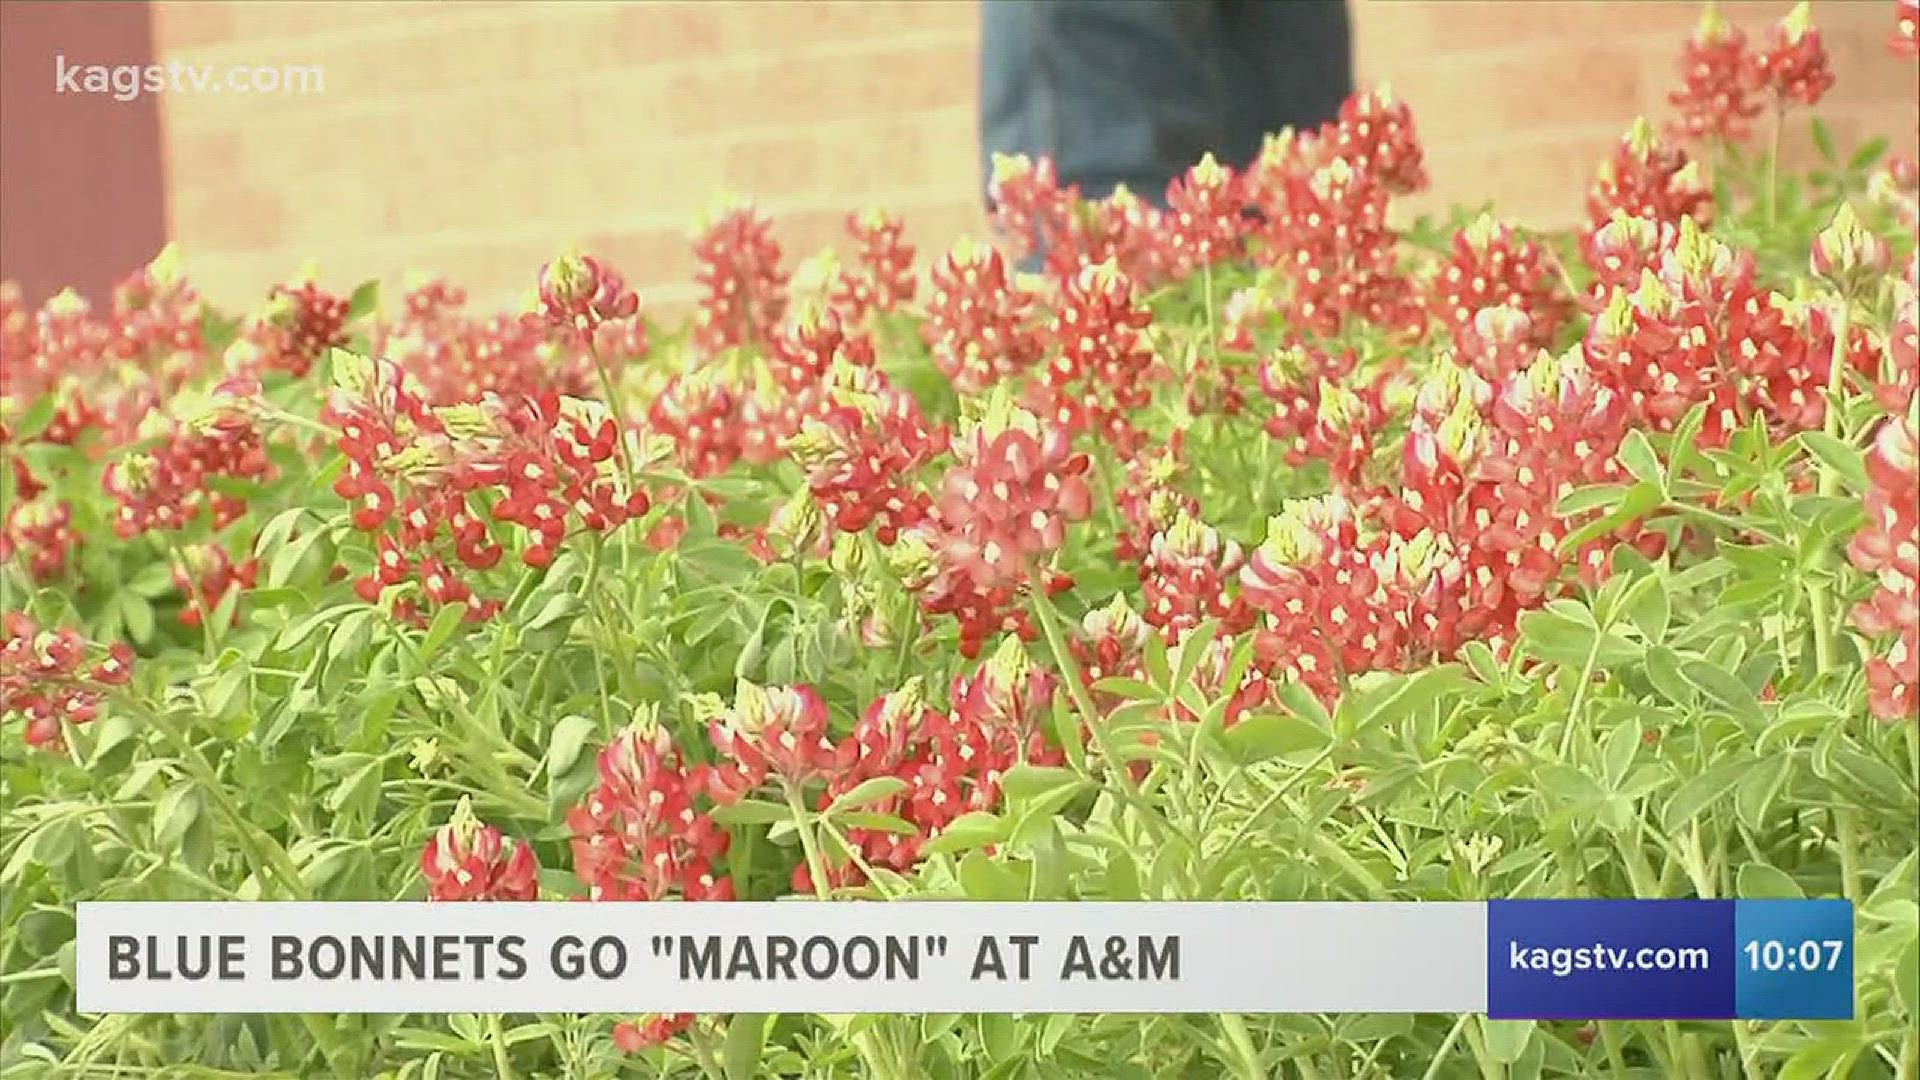 It's that time of year again and spring is almost here. We're beginning to see the first sign of our beloved state flower, the bluebonnet, begin to bloom, and now it has a touch of maroon thanks to some few special Aggies.